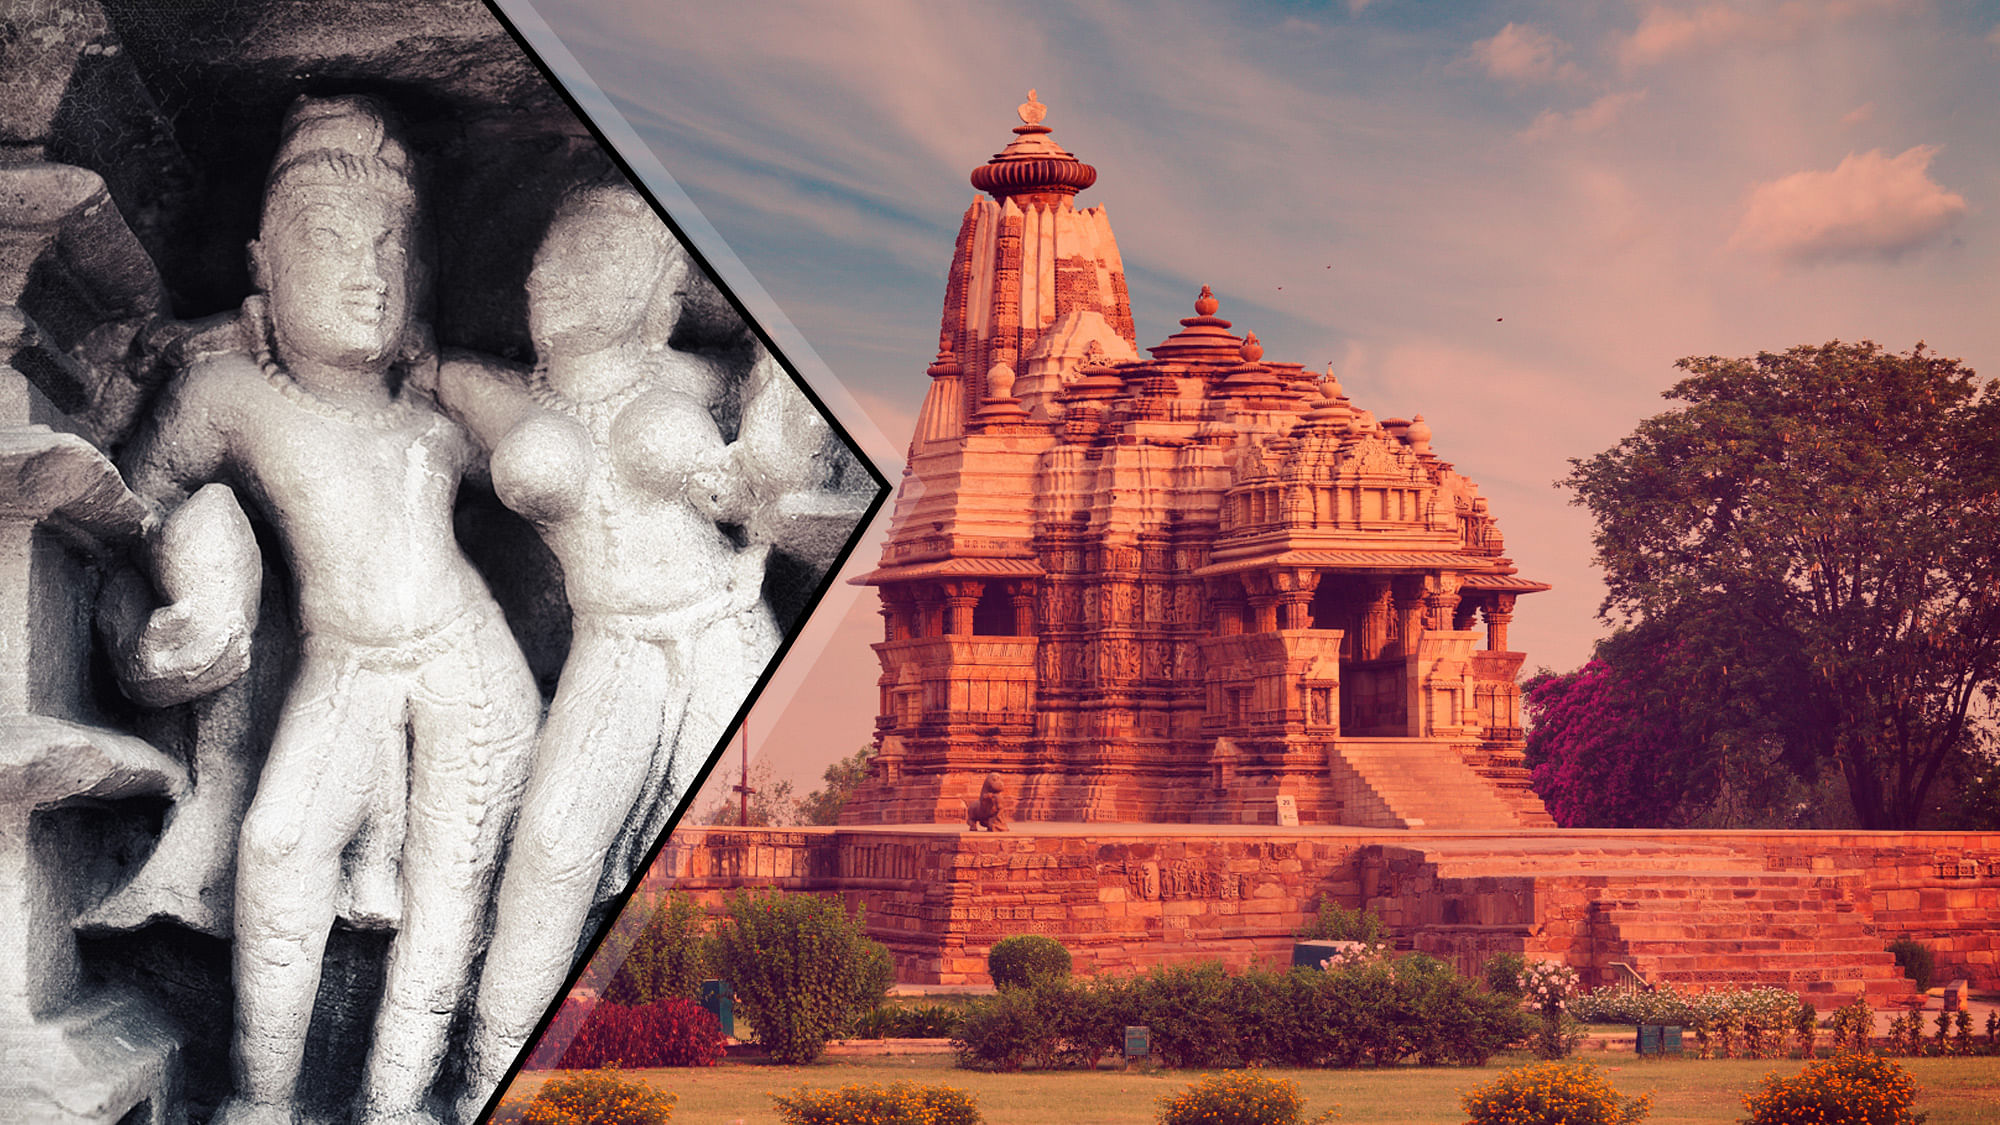 According to an audio guide, only a tenth of Khajuraho’s sculptures are explicit in nature.&nbsp;(Photo: iStock/Altered by <b>The Quint</b>)